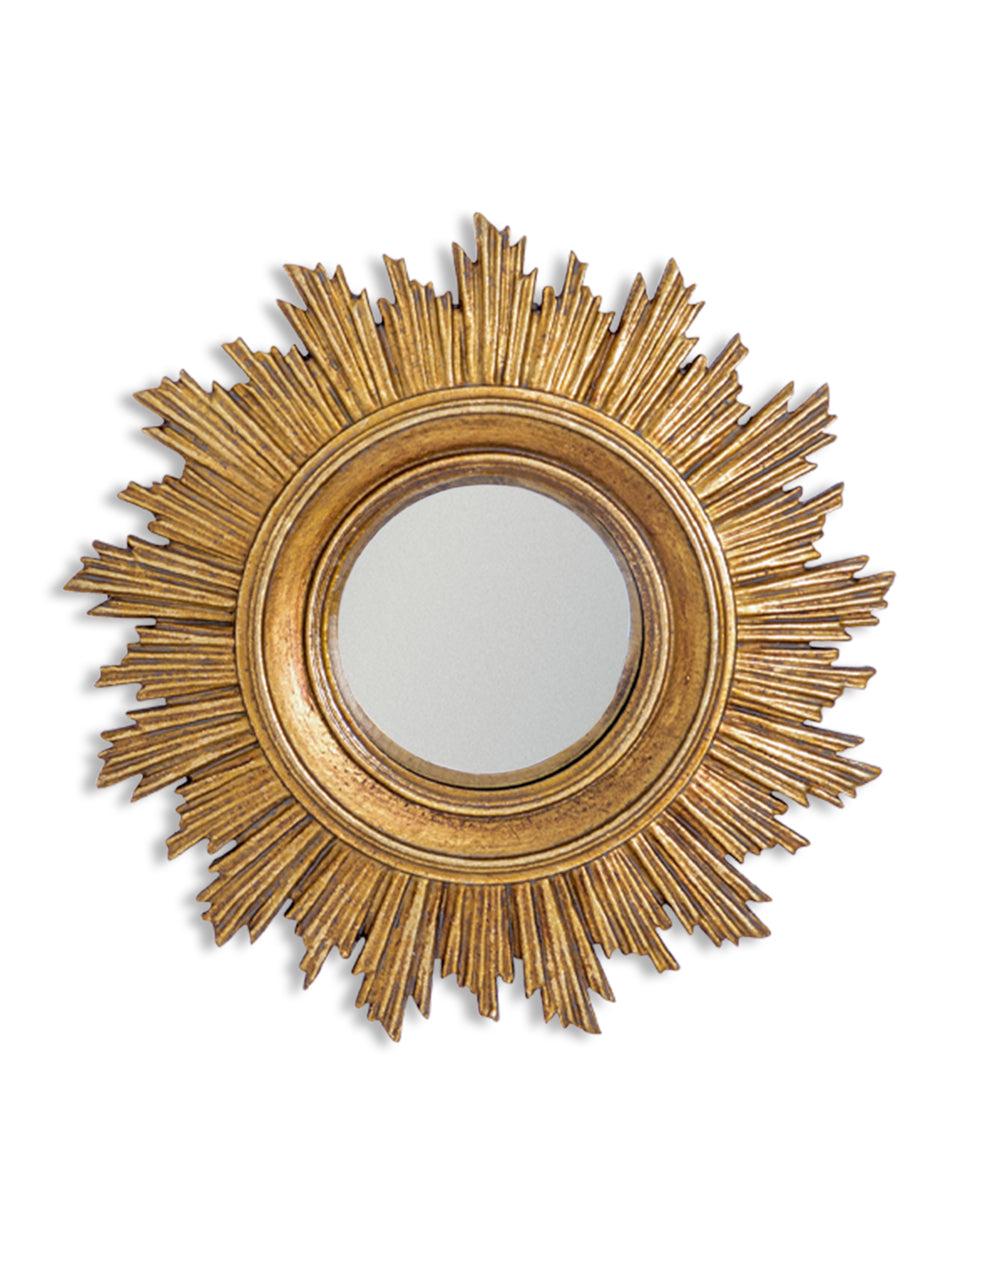 Ornate Antiqued Gold Framed Small Convex Mirror